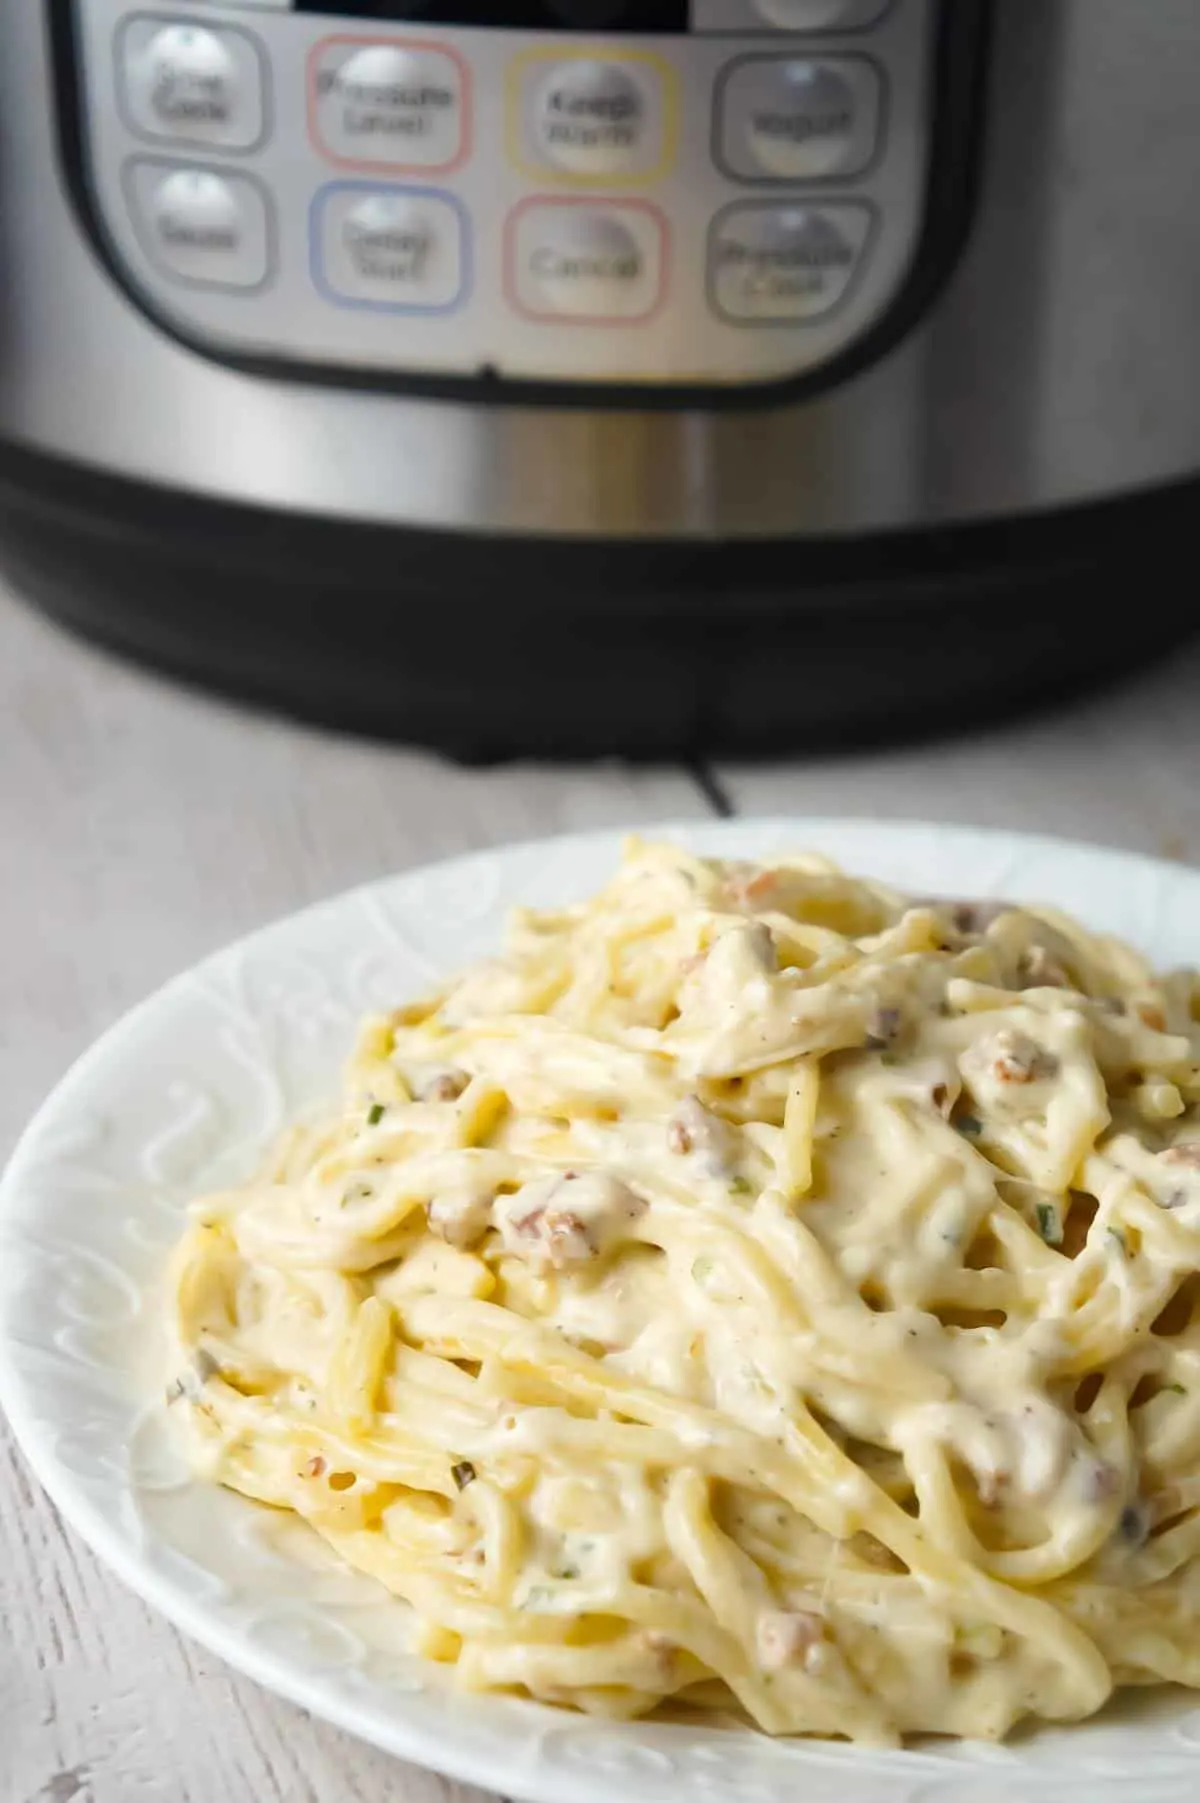 Instant Pot Bacon Cream Cheese Spaghetti is an easy pasta recipe made with heavy cream, chive and onion cream cheese, cream of bacon soup, shredded cheese and crumbled bacon.